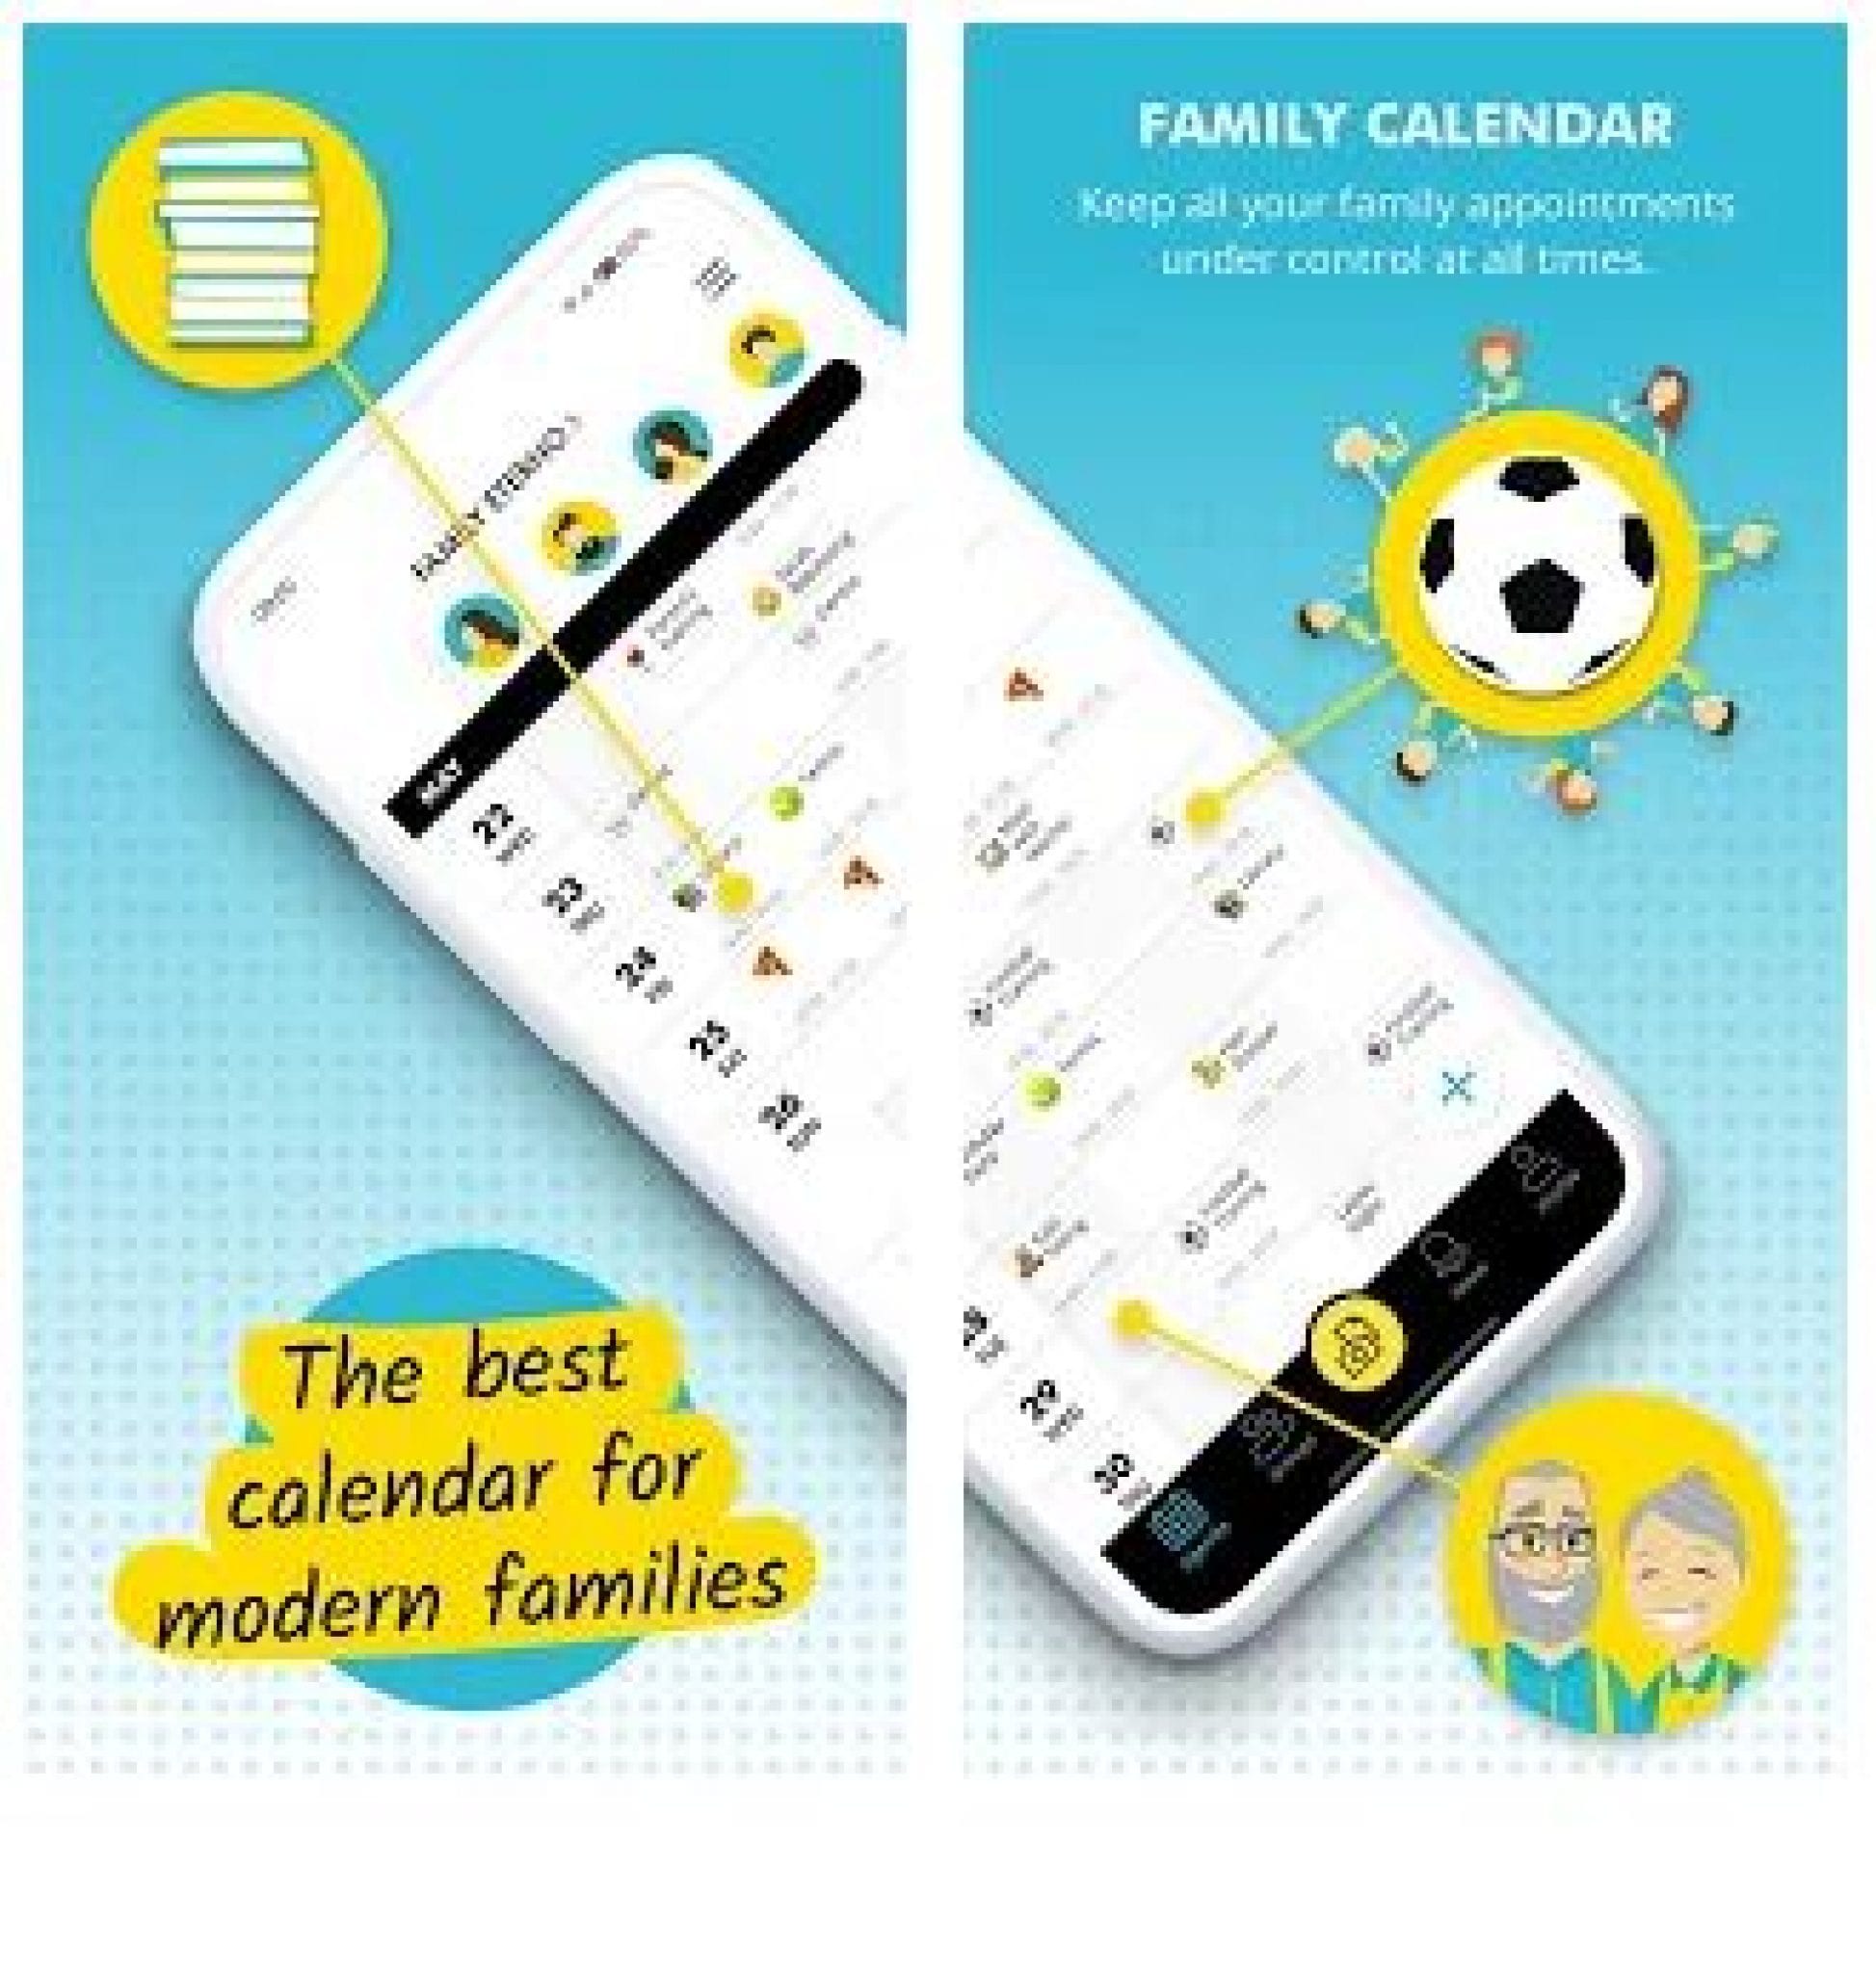 11 Best family calendar apps for Android iOS Free apps for Android